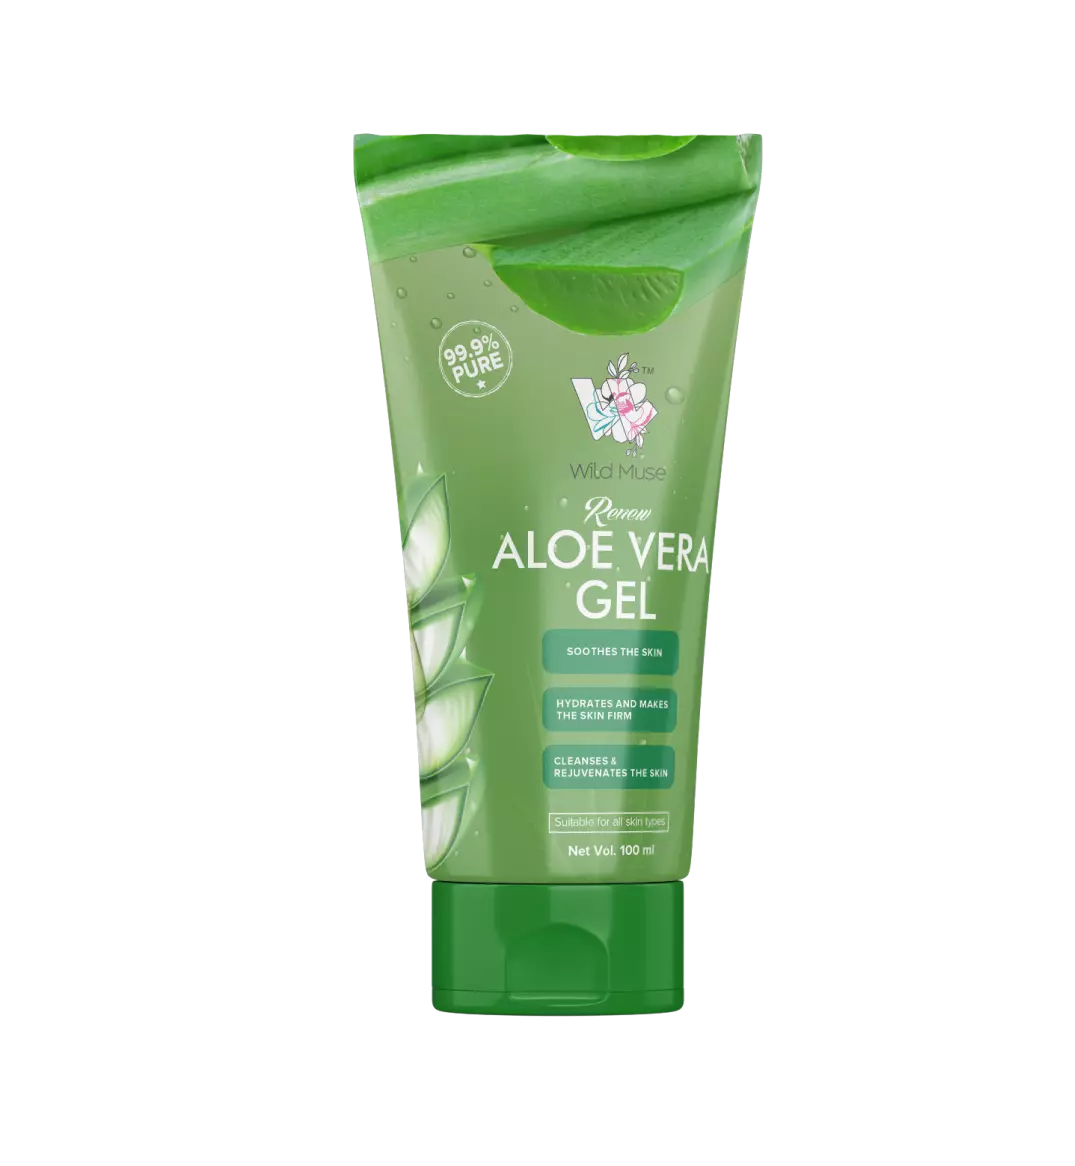 Aloevera Gel- treat and hydrate you skin with natural aloevera extract.